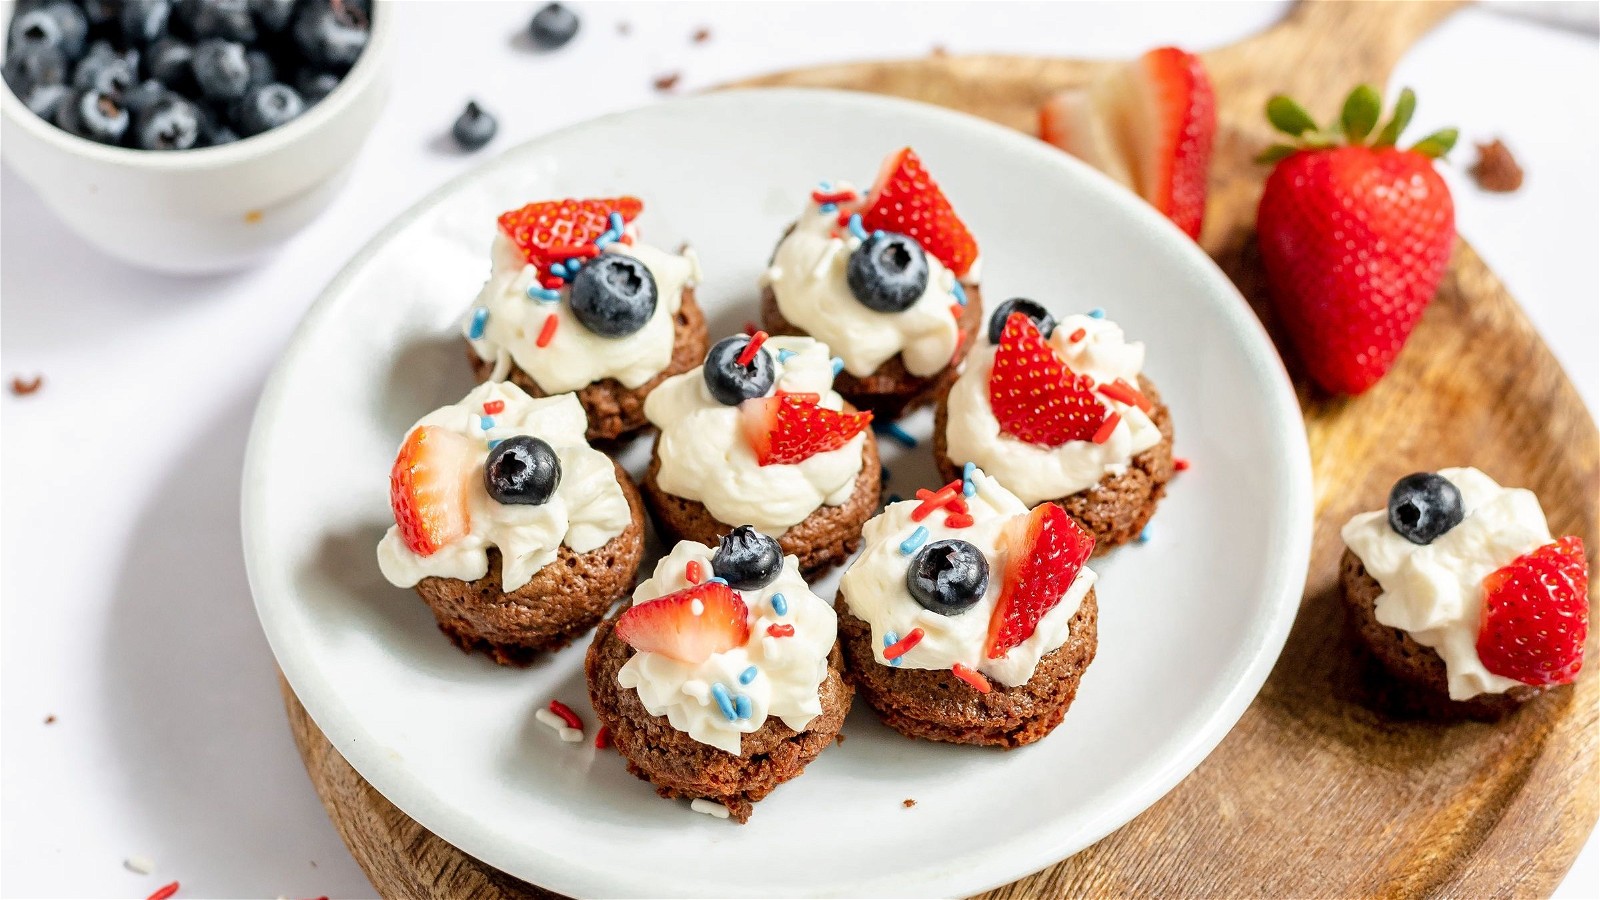 Image of Red, White, and Blue Gluten-free Brownie Bites by Elise New